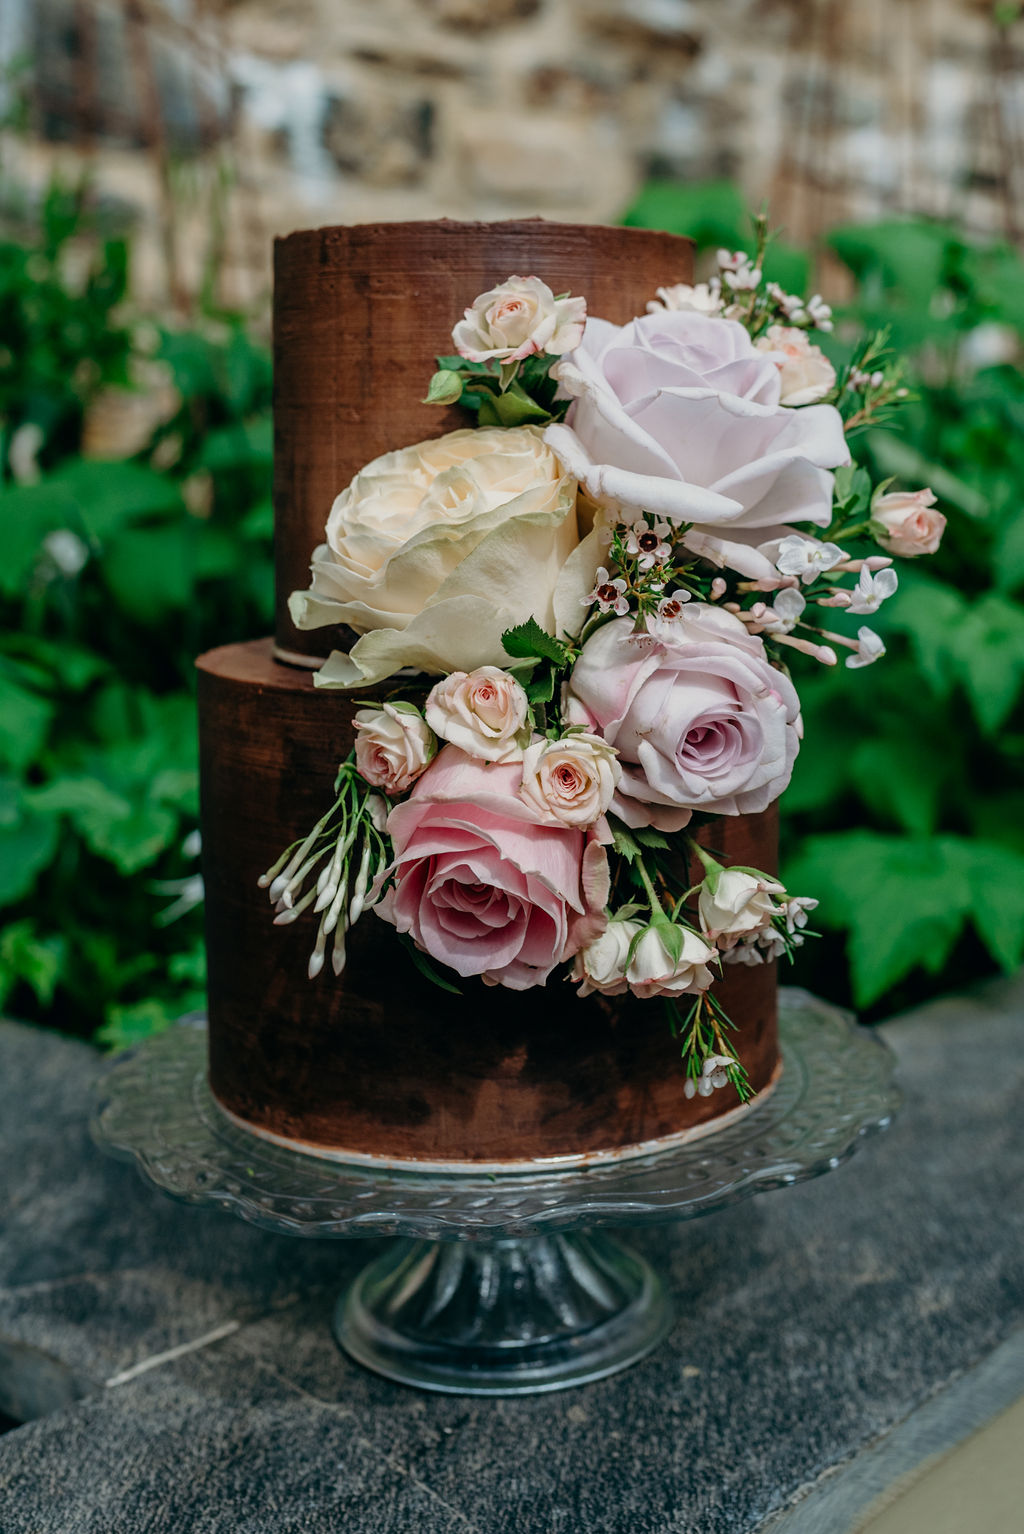 chocolate fondant cake, elopement cakes, flowers, roses, pink & pretty, two tiers, ever after